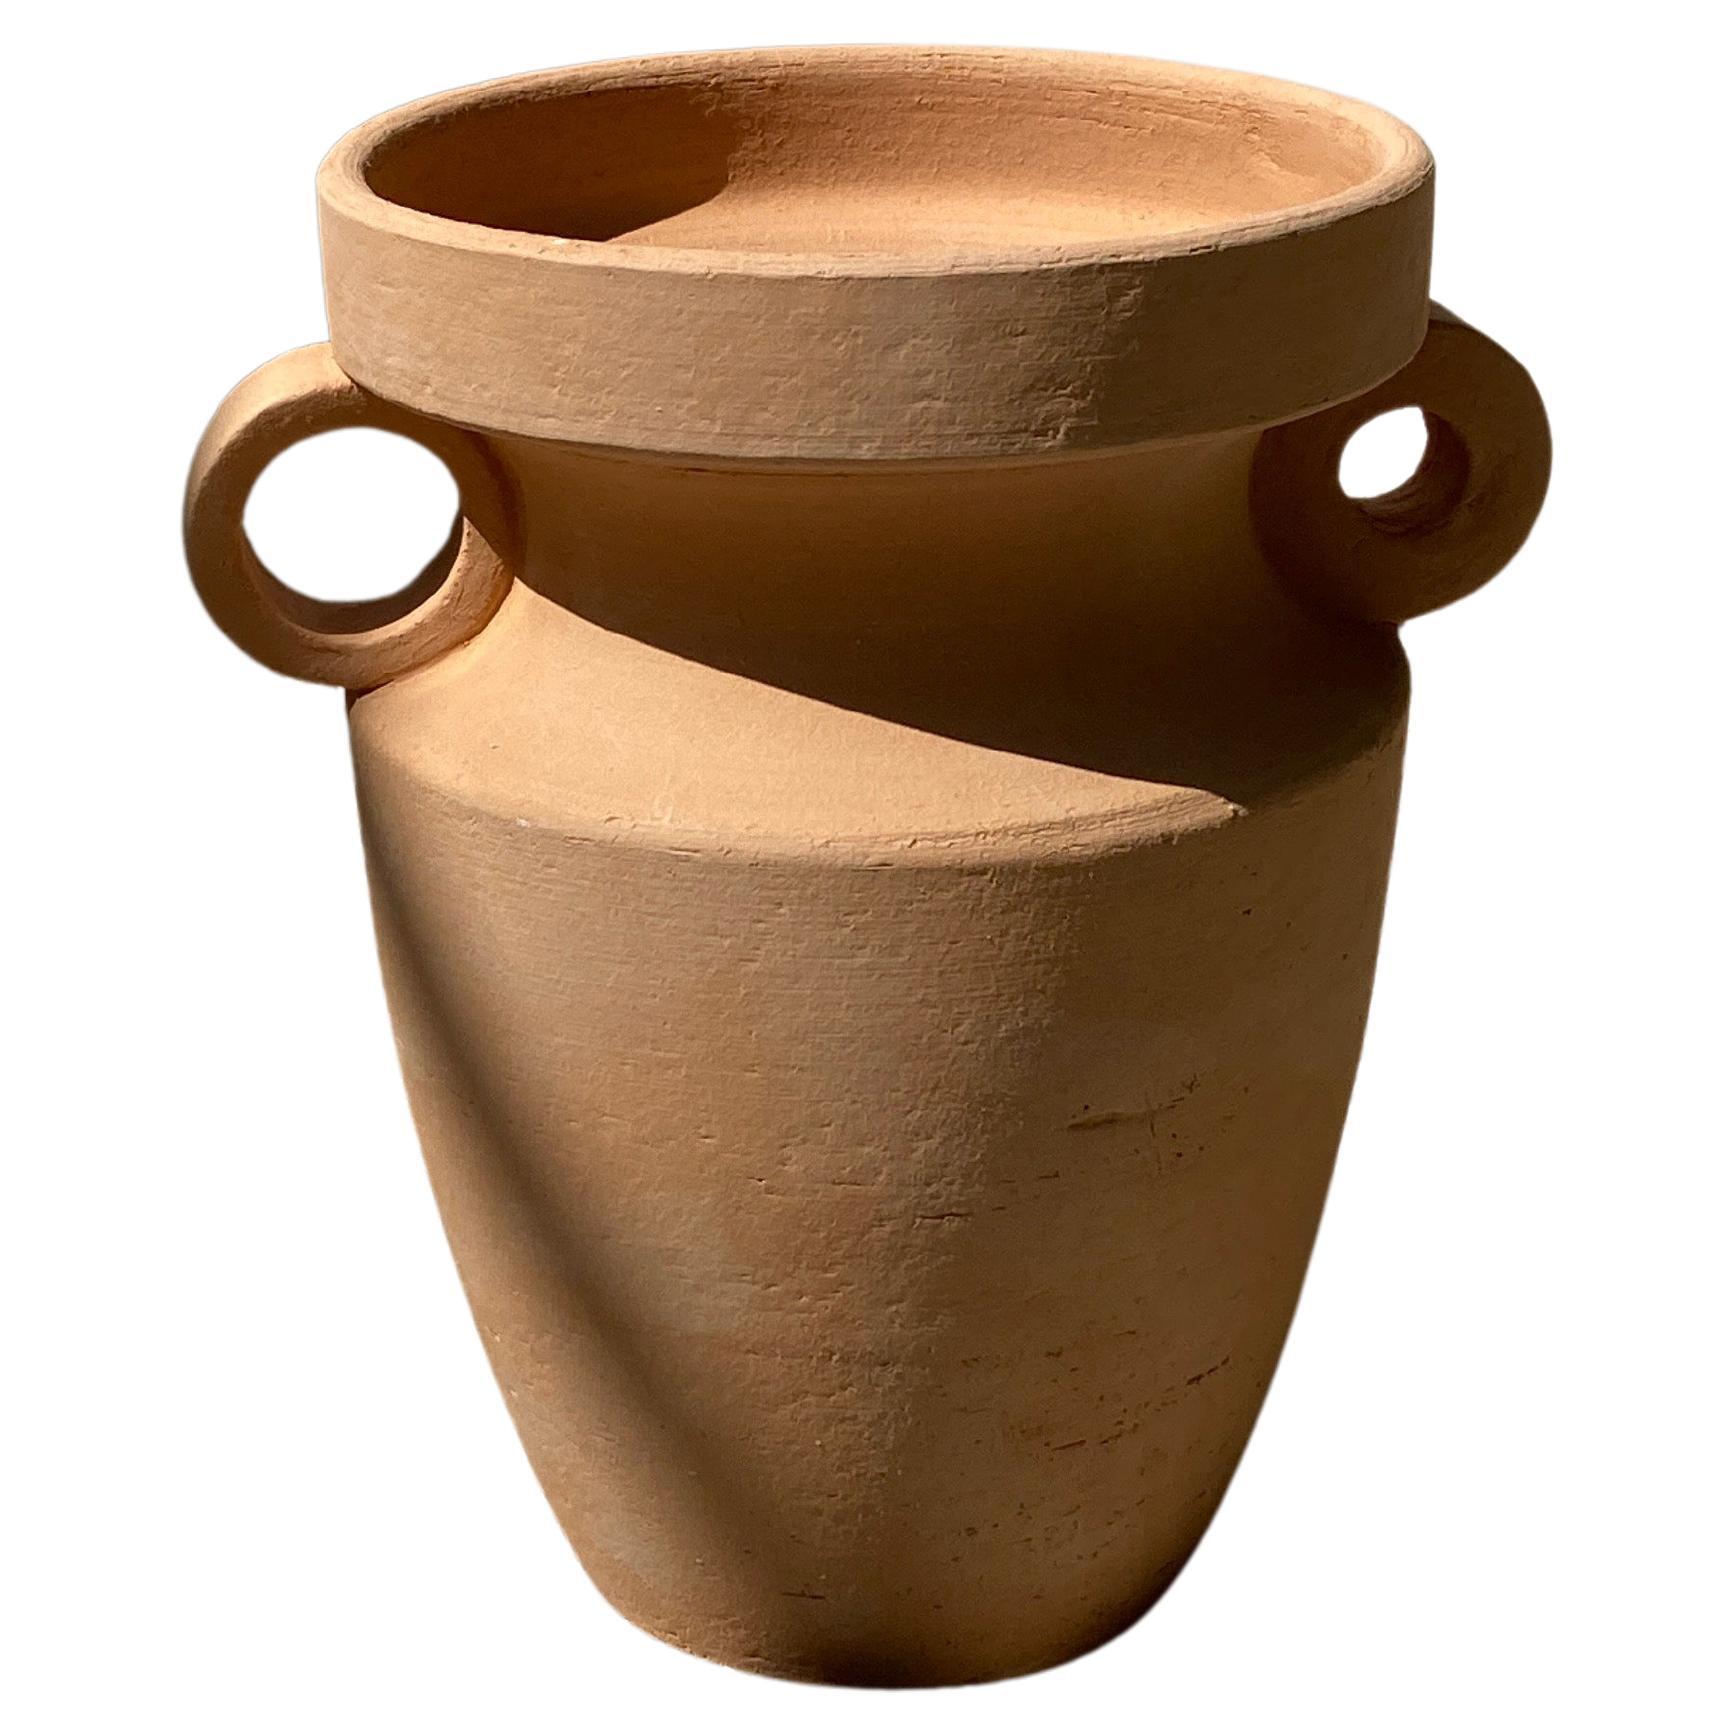 Terracotta Les Inseparables Whole Flower Vase by Lea Ginac